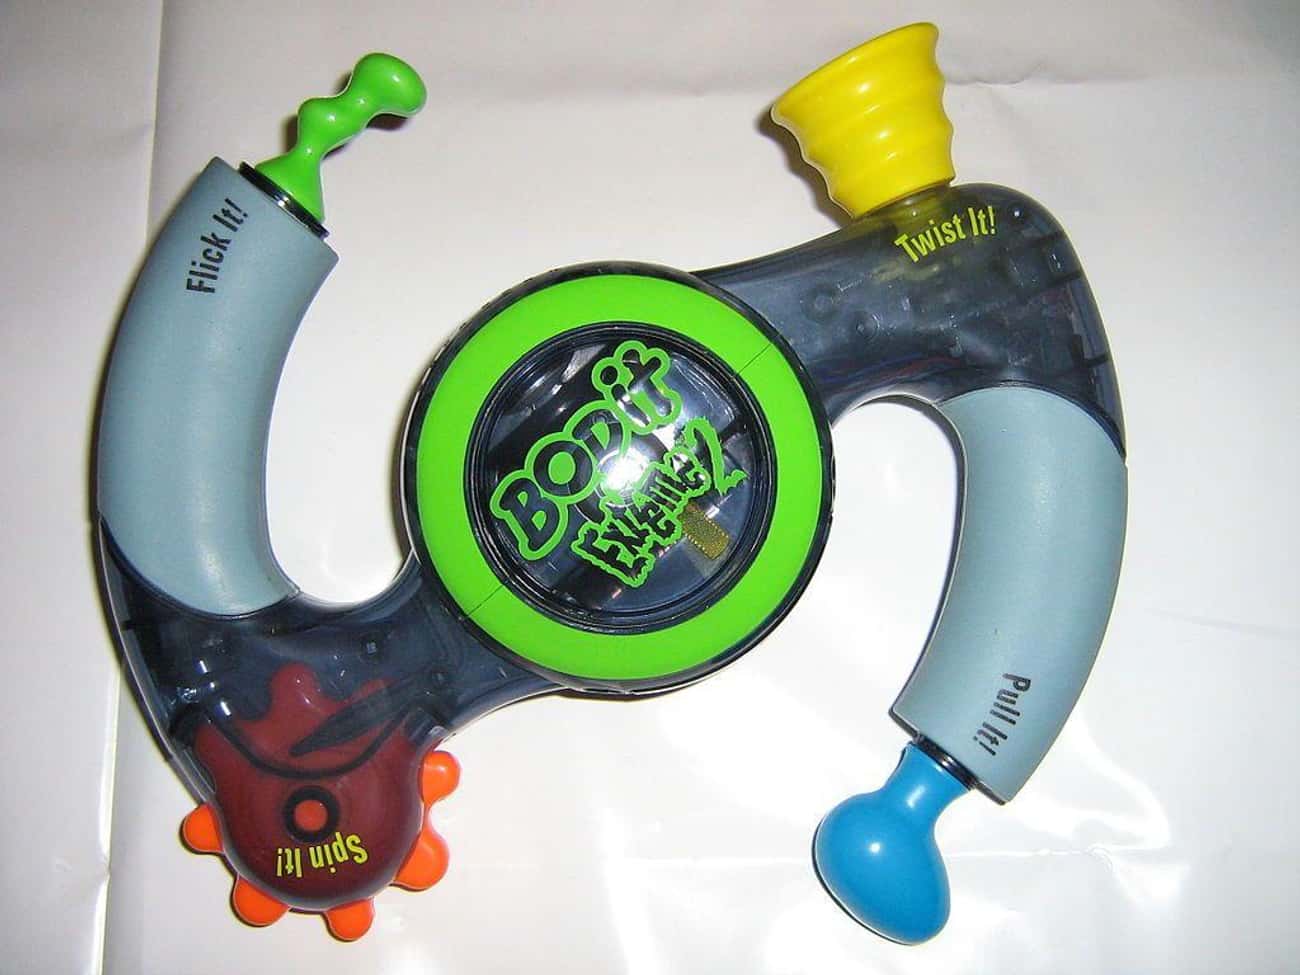 If You Still Have The Bop It Extreme It's Worth Over $100